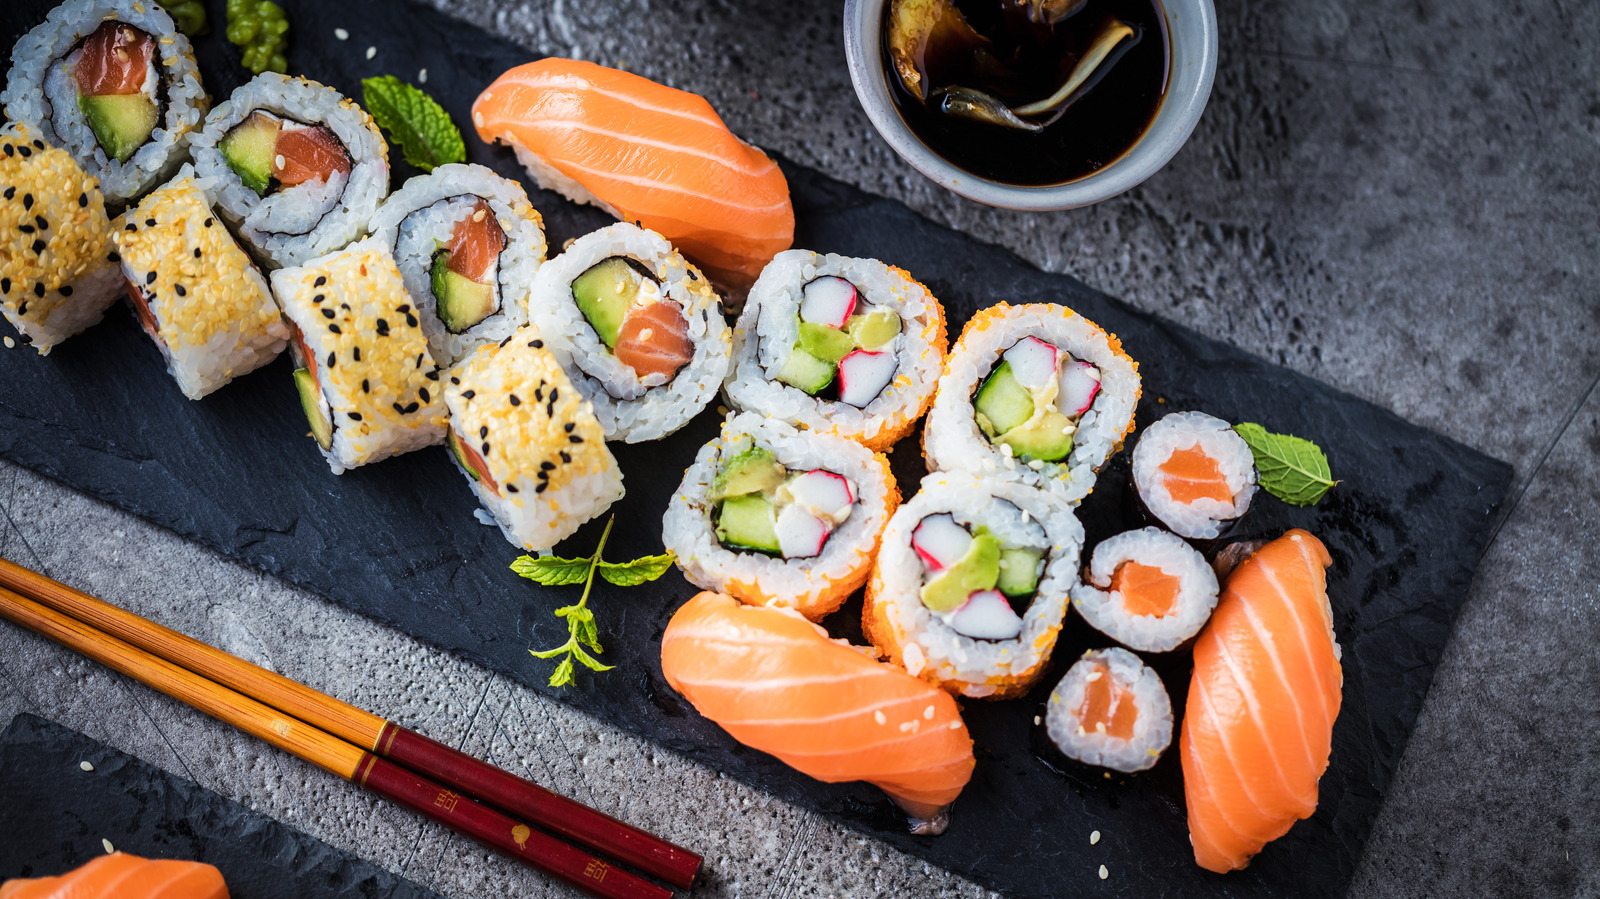 The Original Sushi Was Made With This Unexpected Ingredient